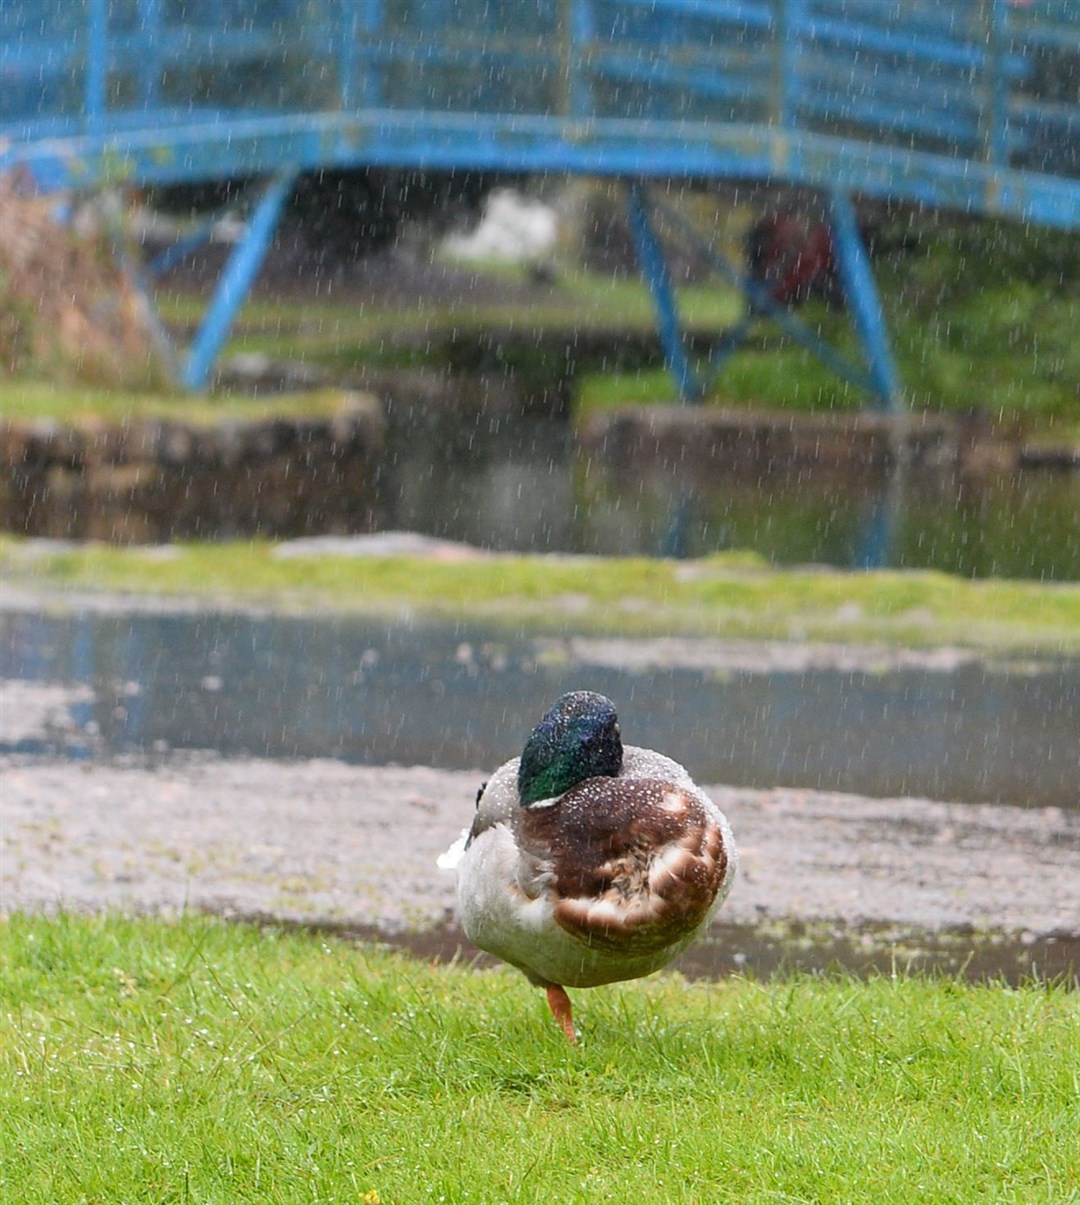 Even the ducks took shelter from the rain.